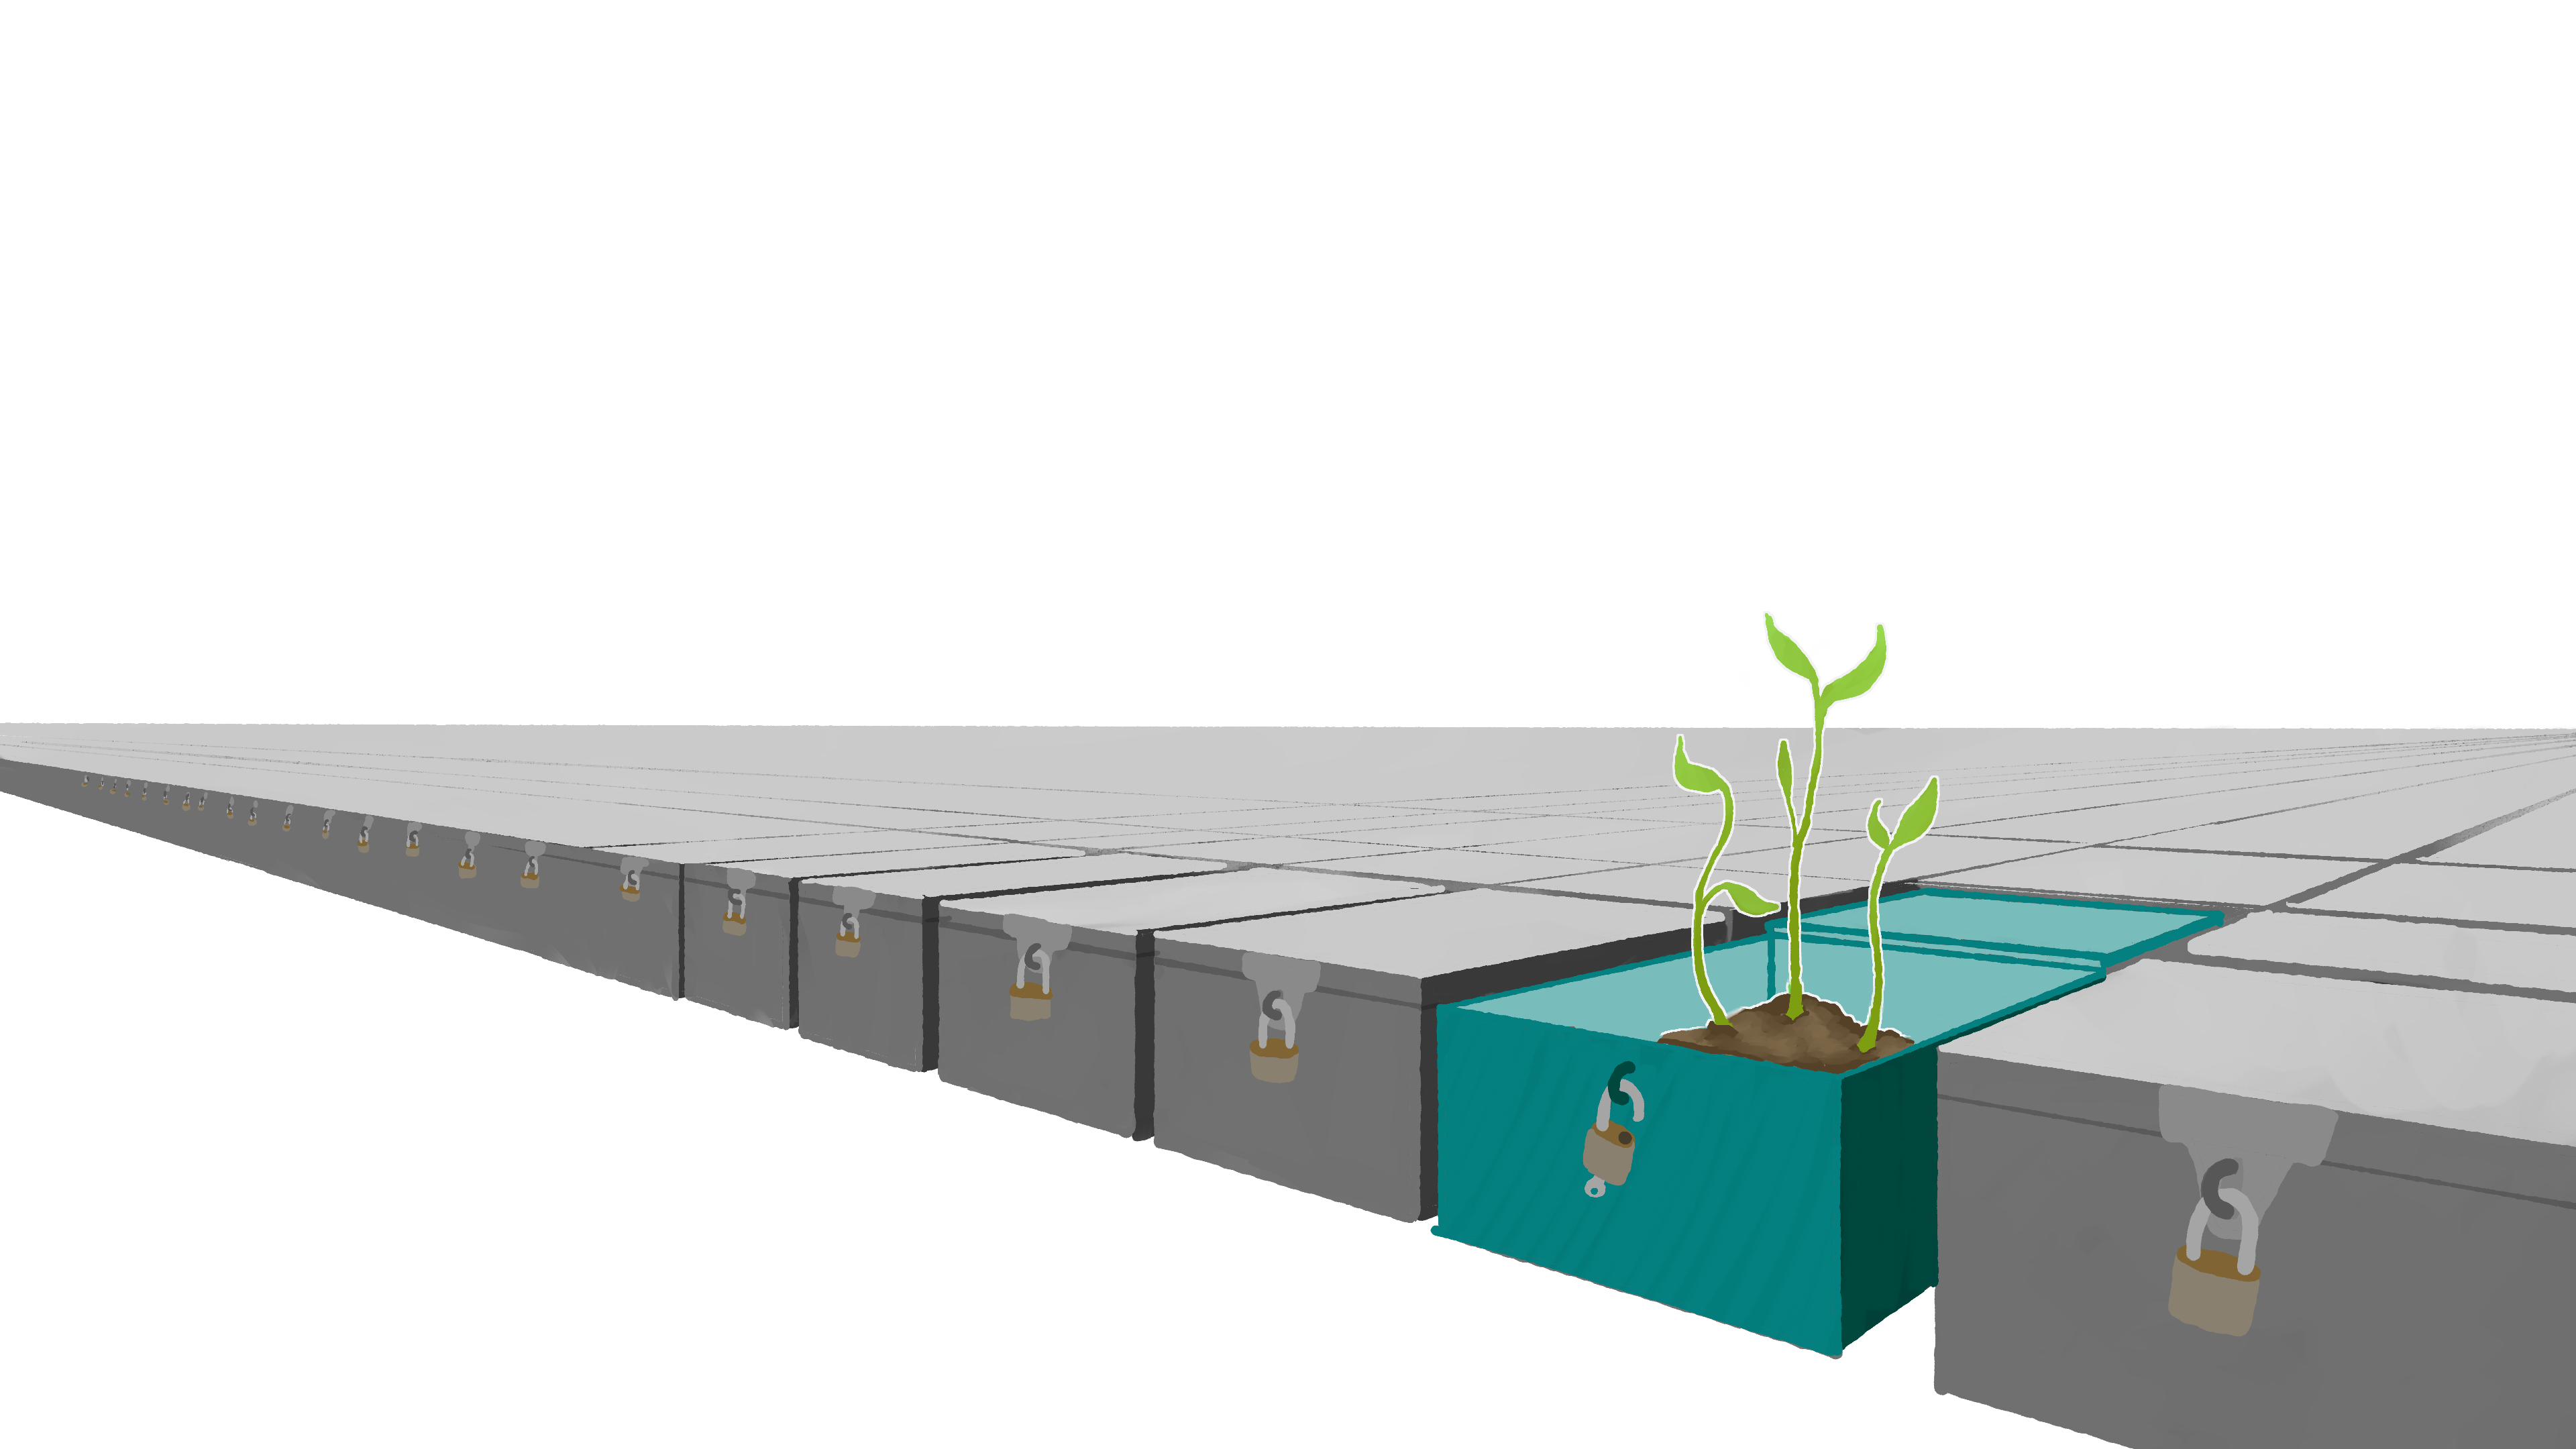 An endless plane of locked boxes. In the foreground, one box is unlocked and open. Within it, seedlings sprout from fertile soil